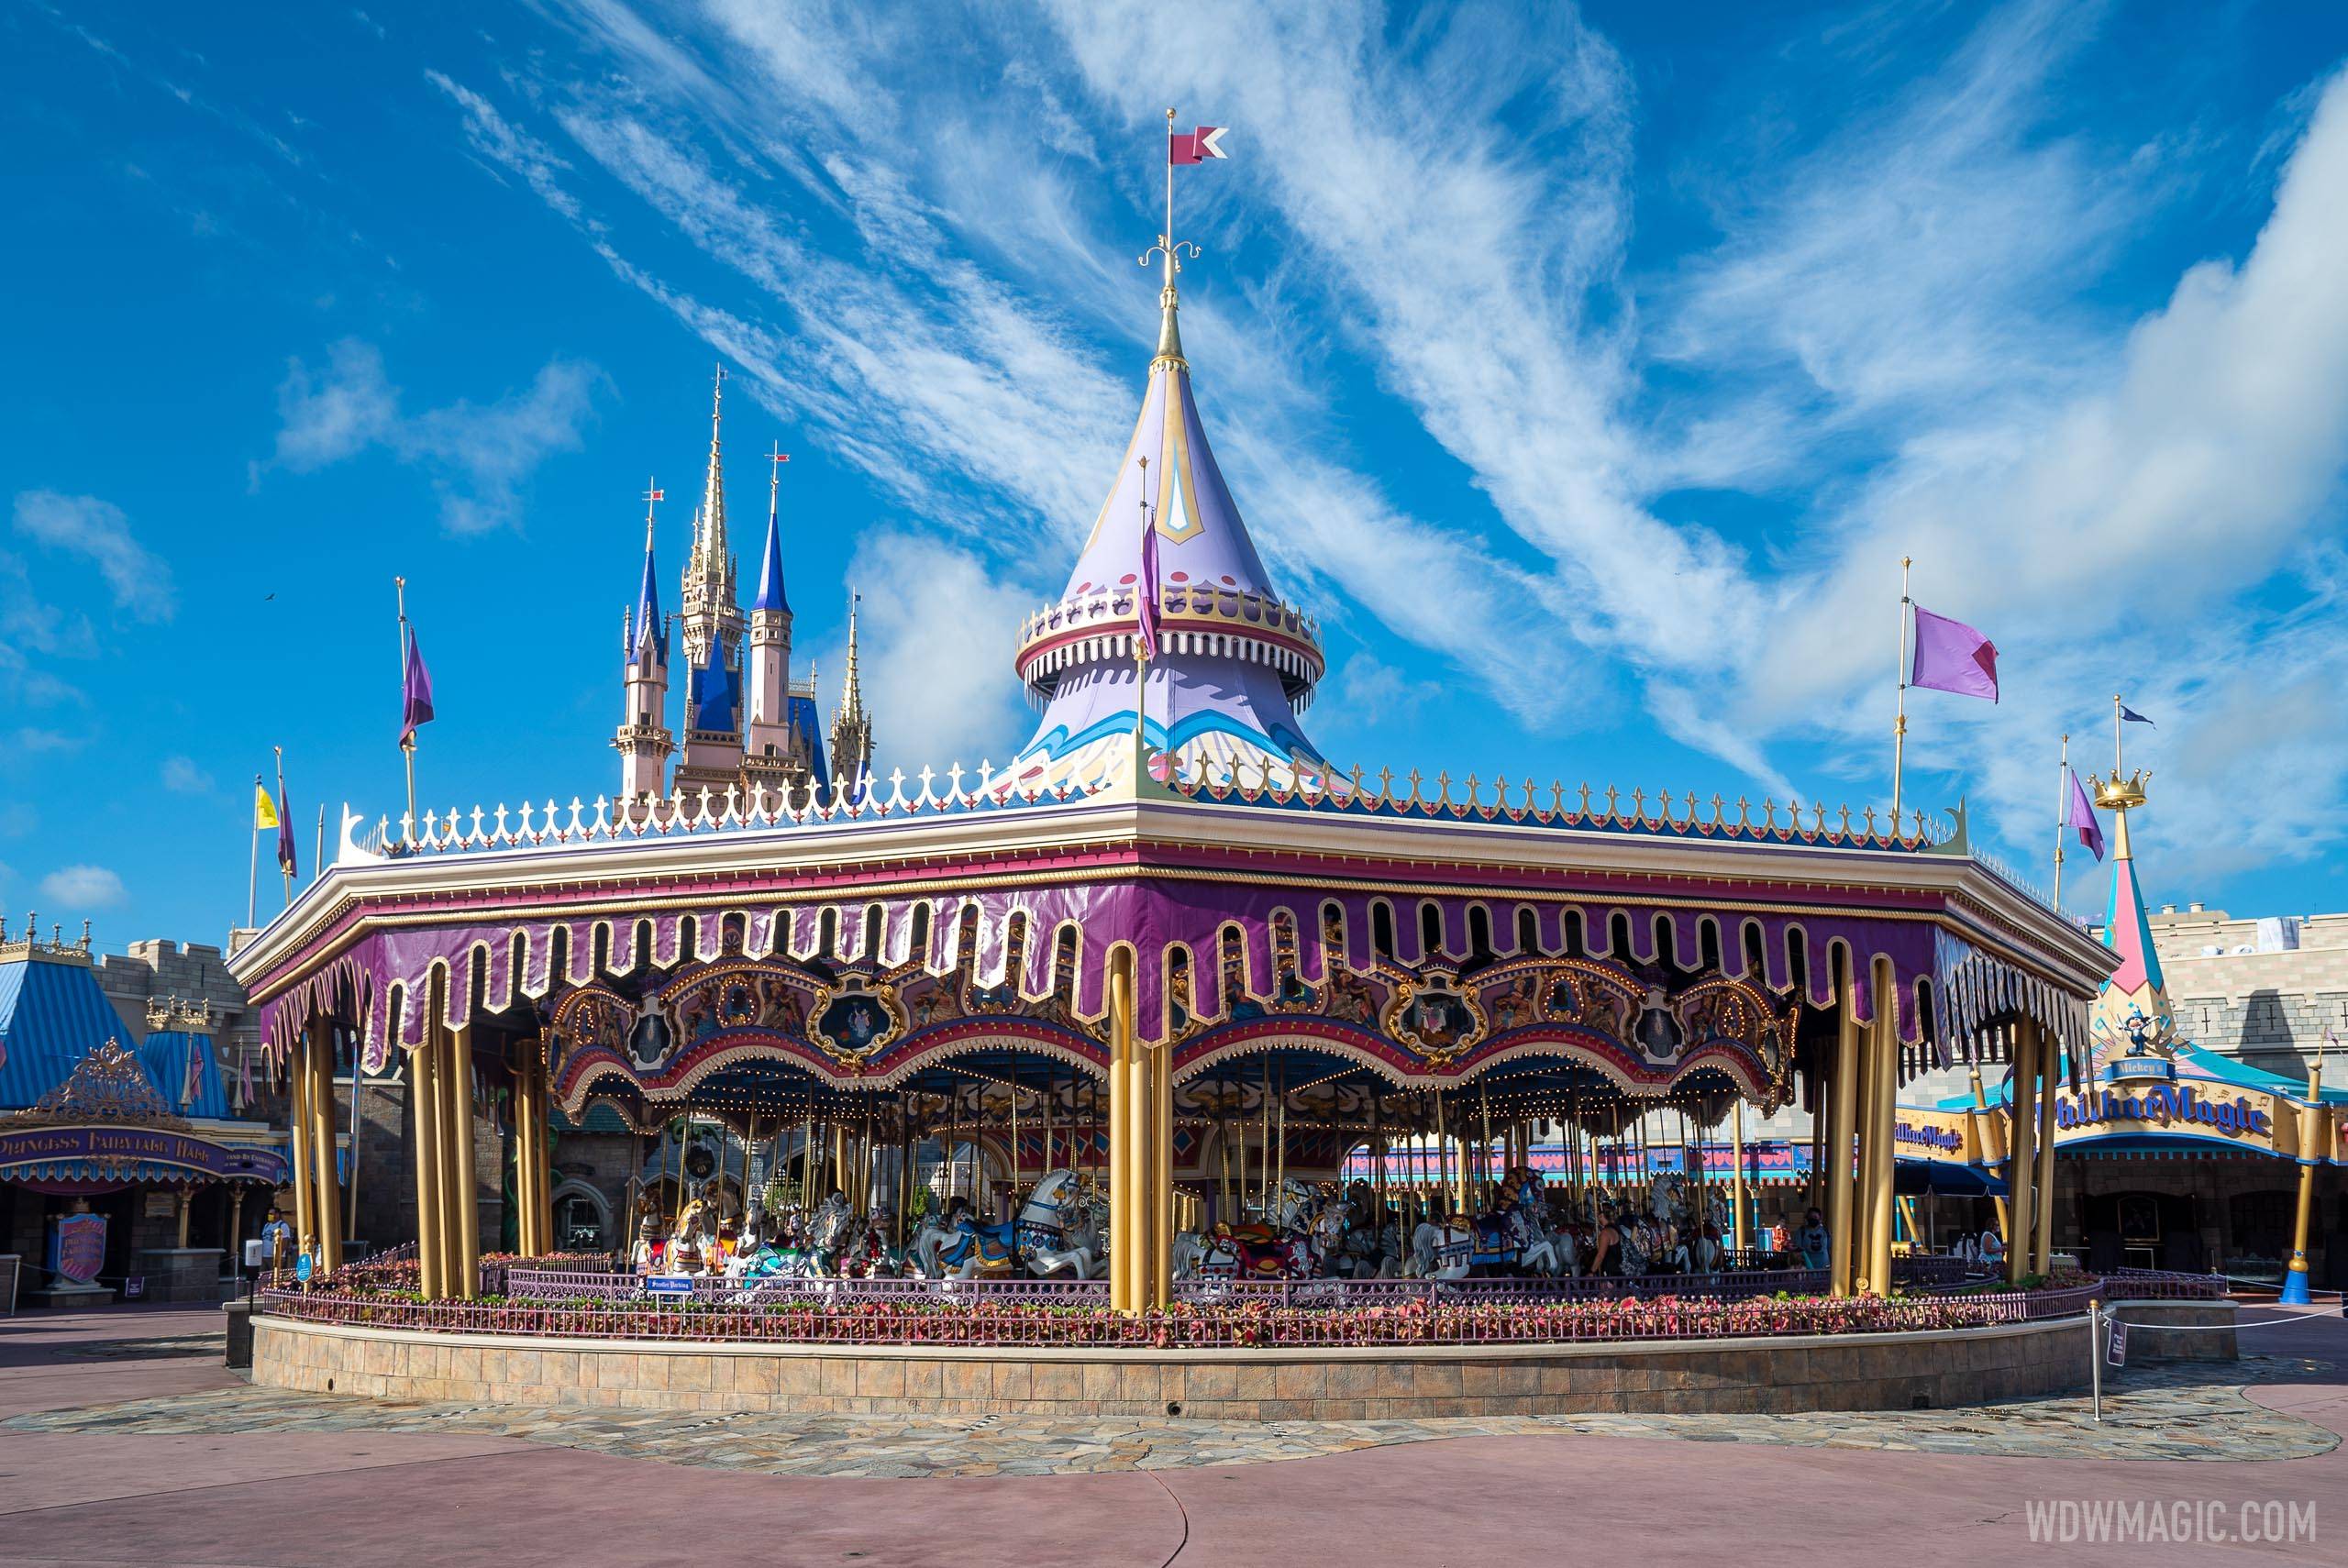 Prince Charming Regal Carrousel scheduled for refurbishment